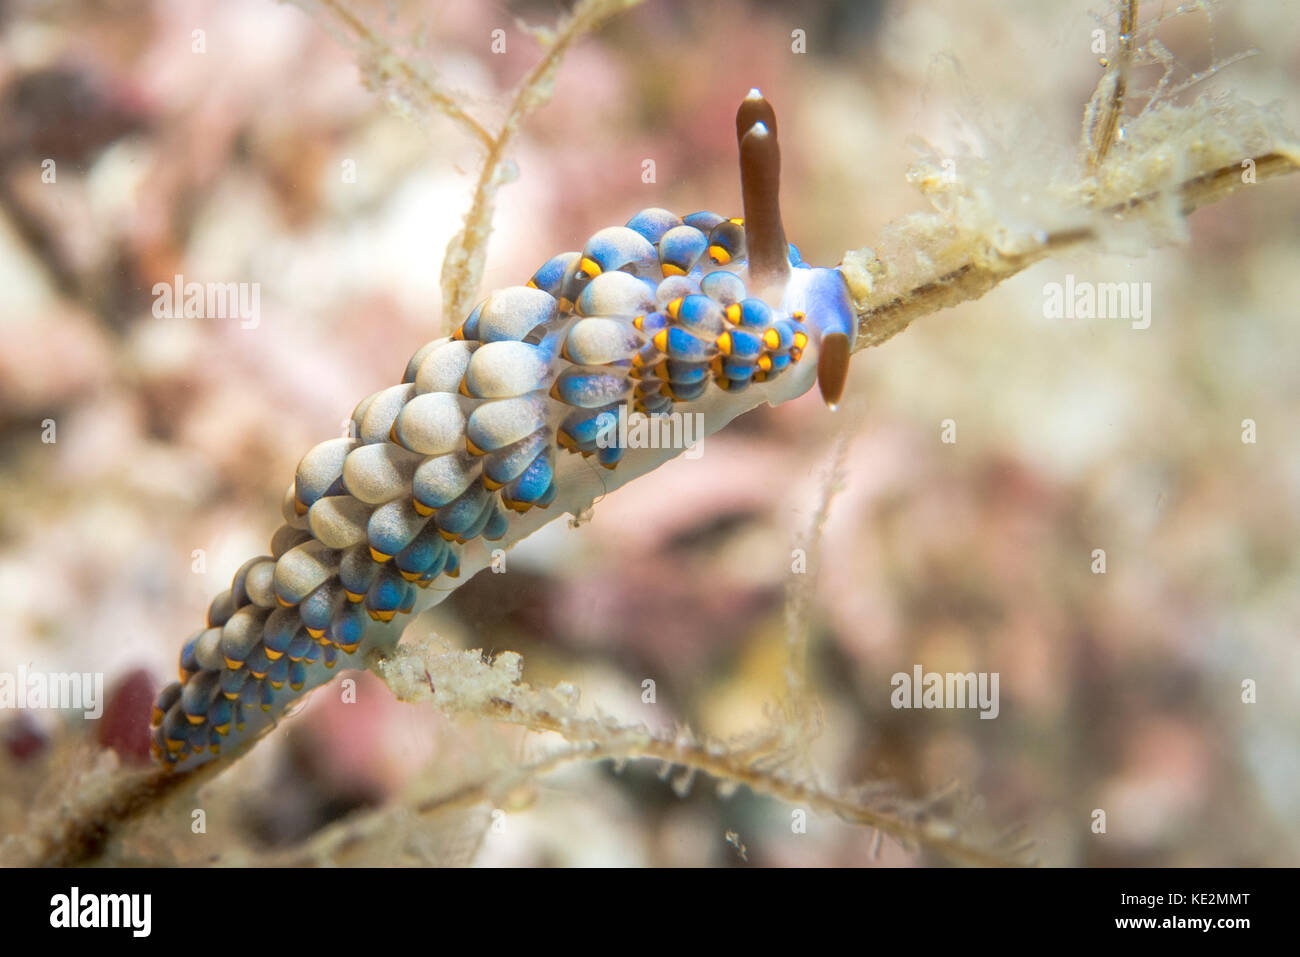 Cuthona yamasui nudibranch in the Philippines. Stock Photo